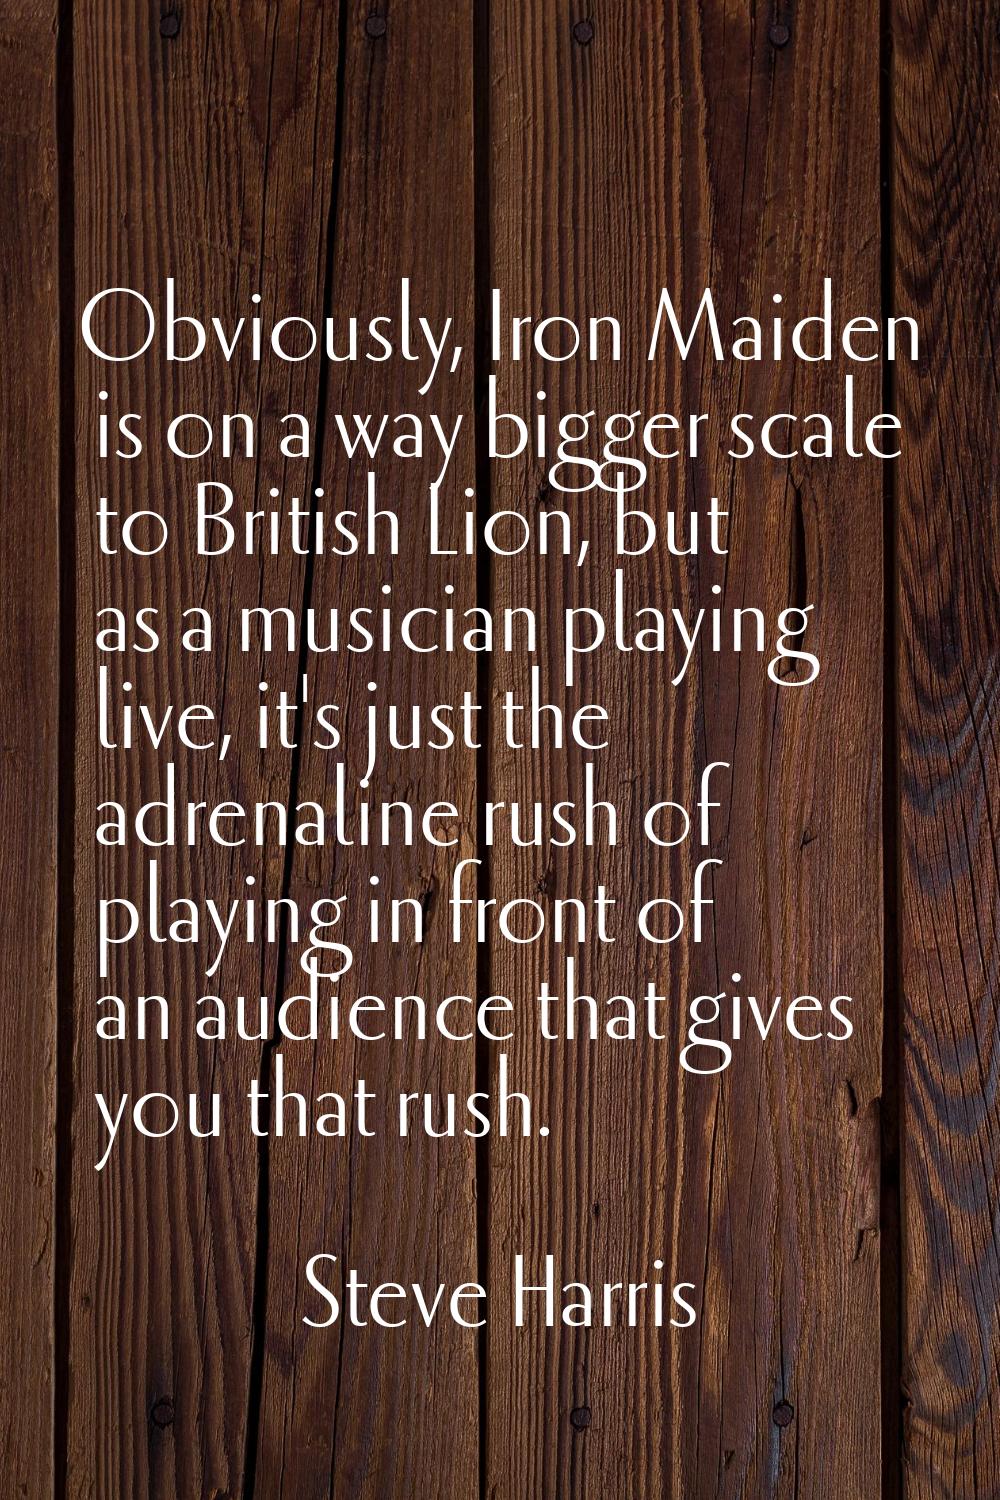 Obviously, Iron Maiden is on a way bigger scale to British Lion, but as a musician playing live, it